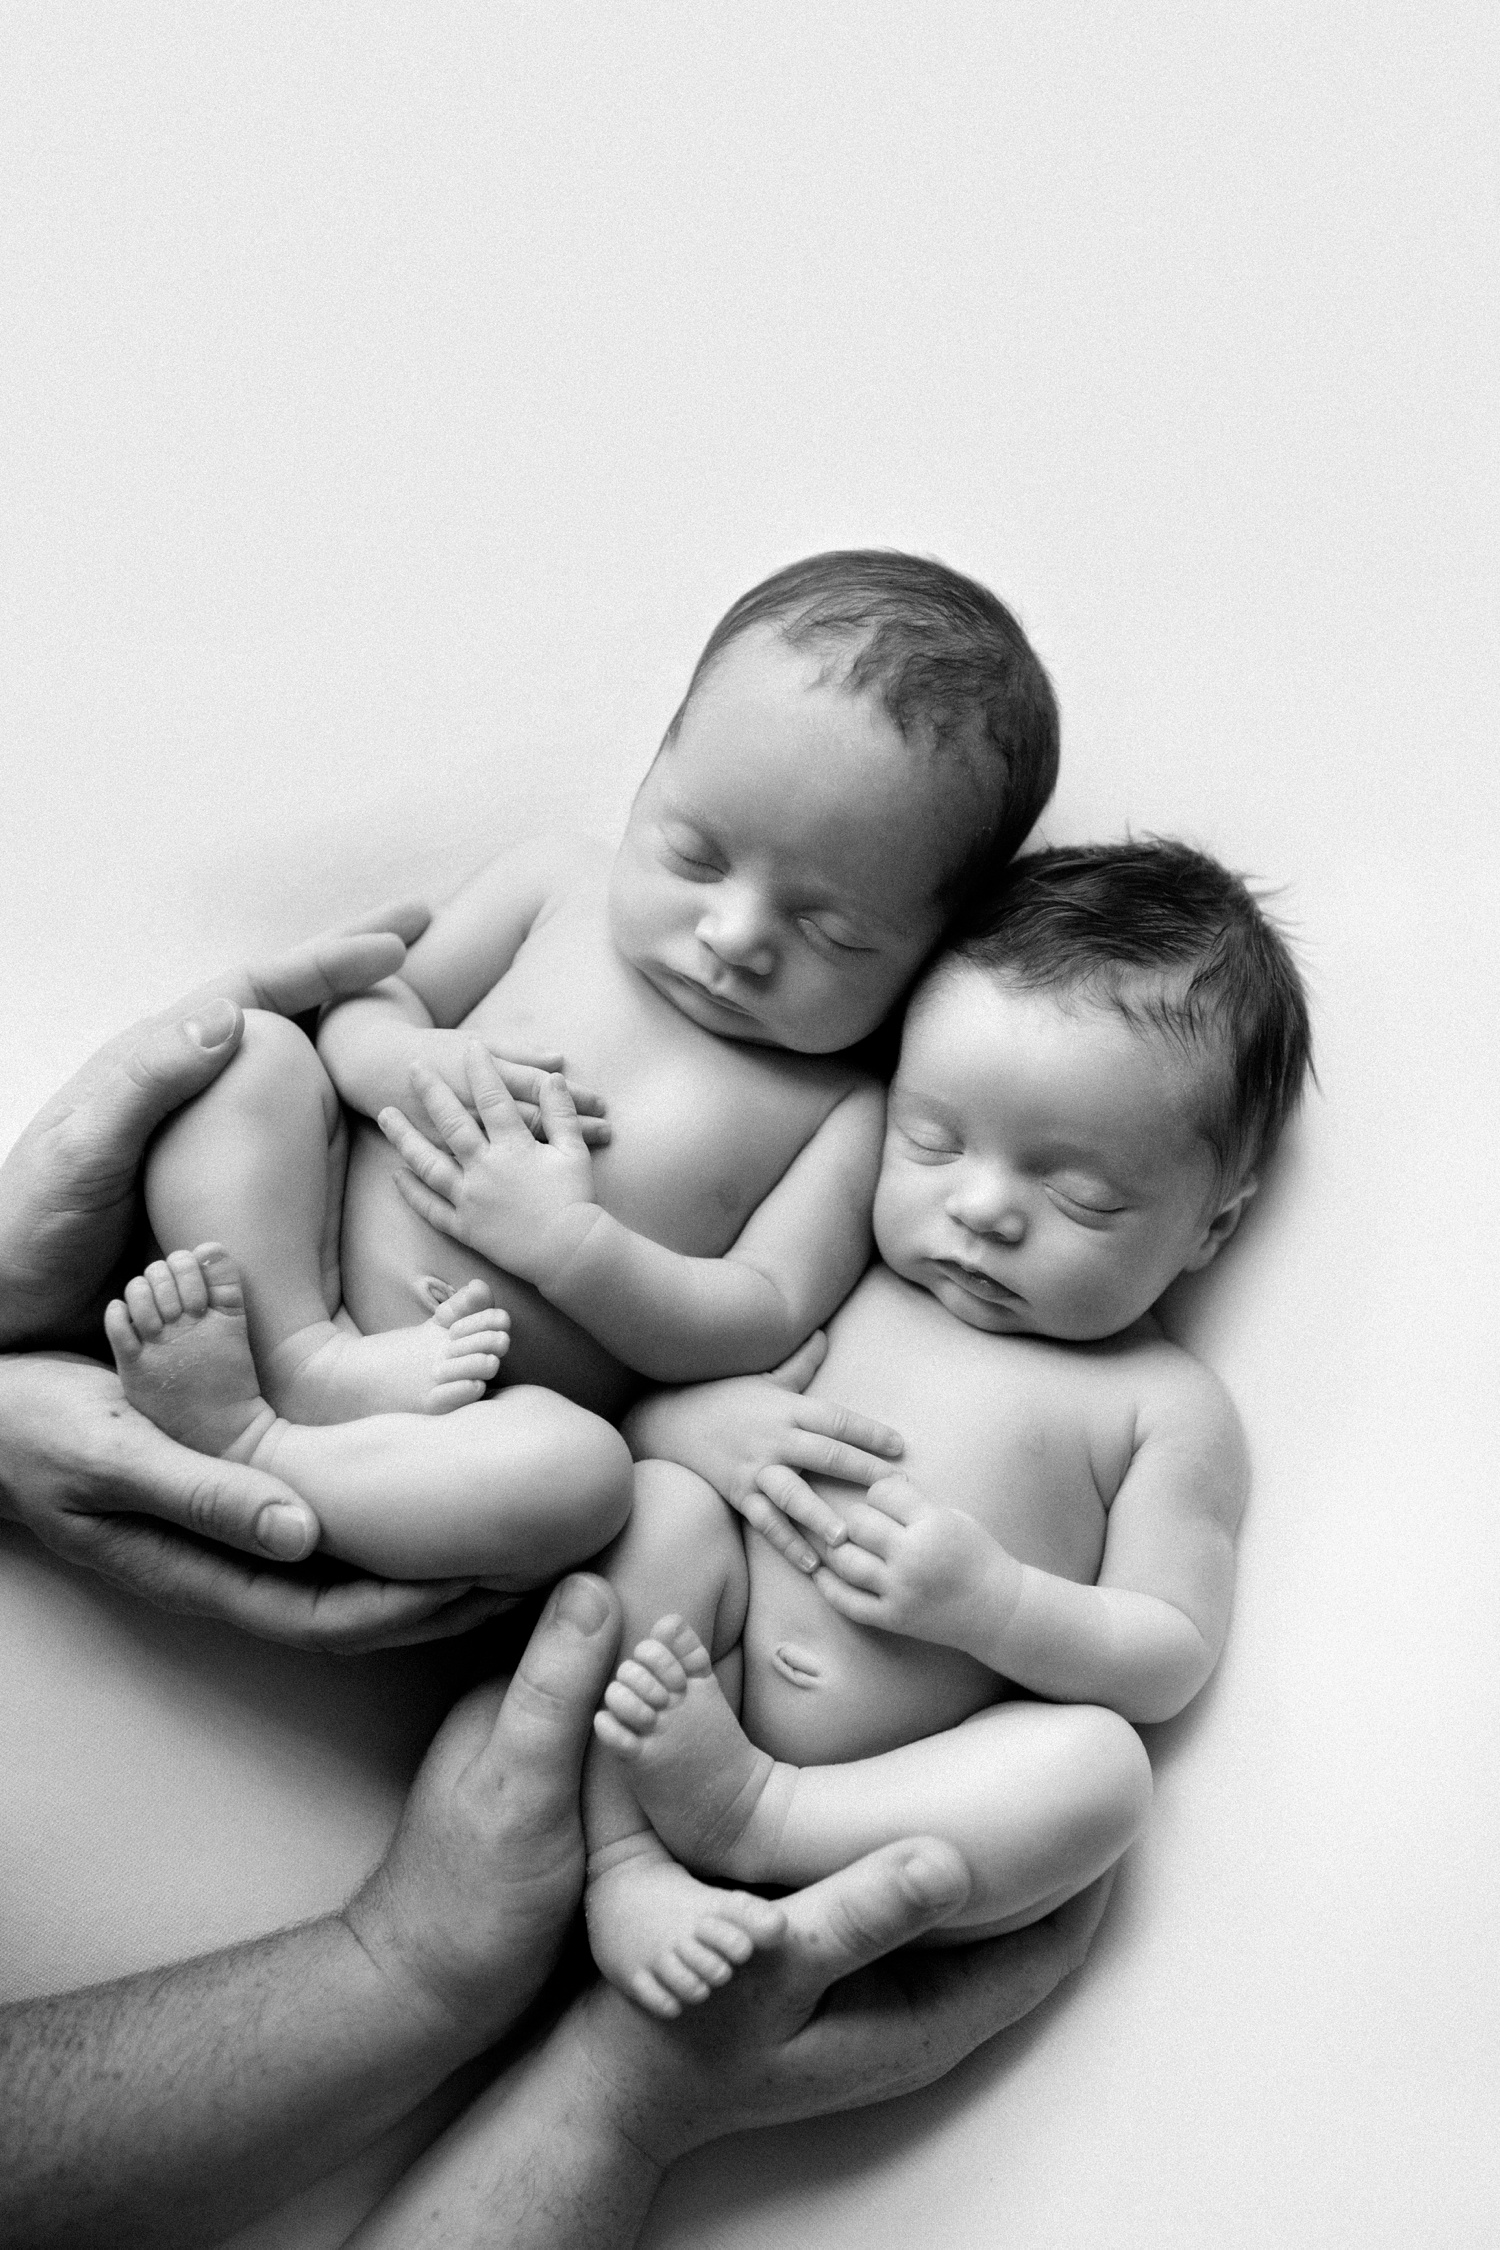 Newborn Twins: The Best Time to Schedule